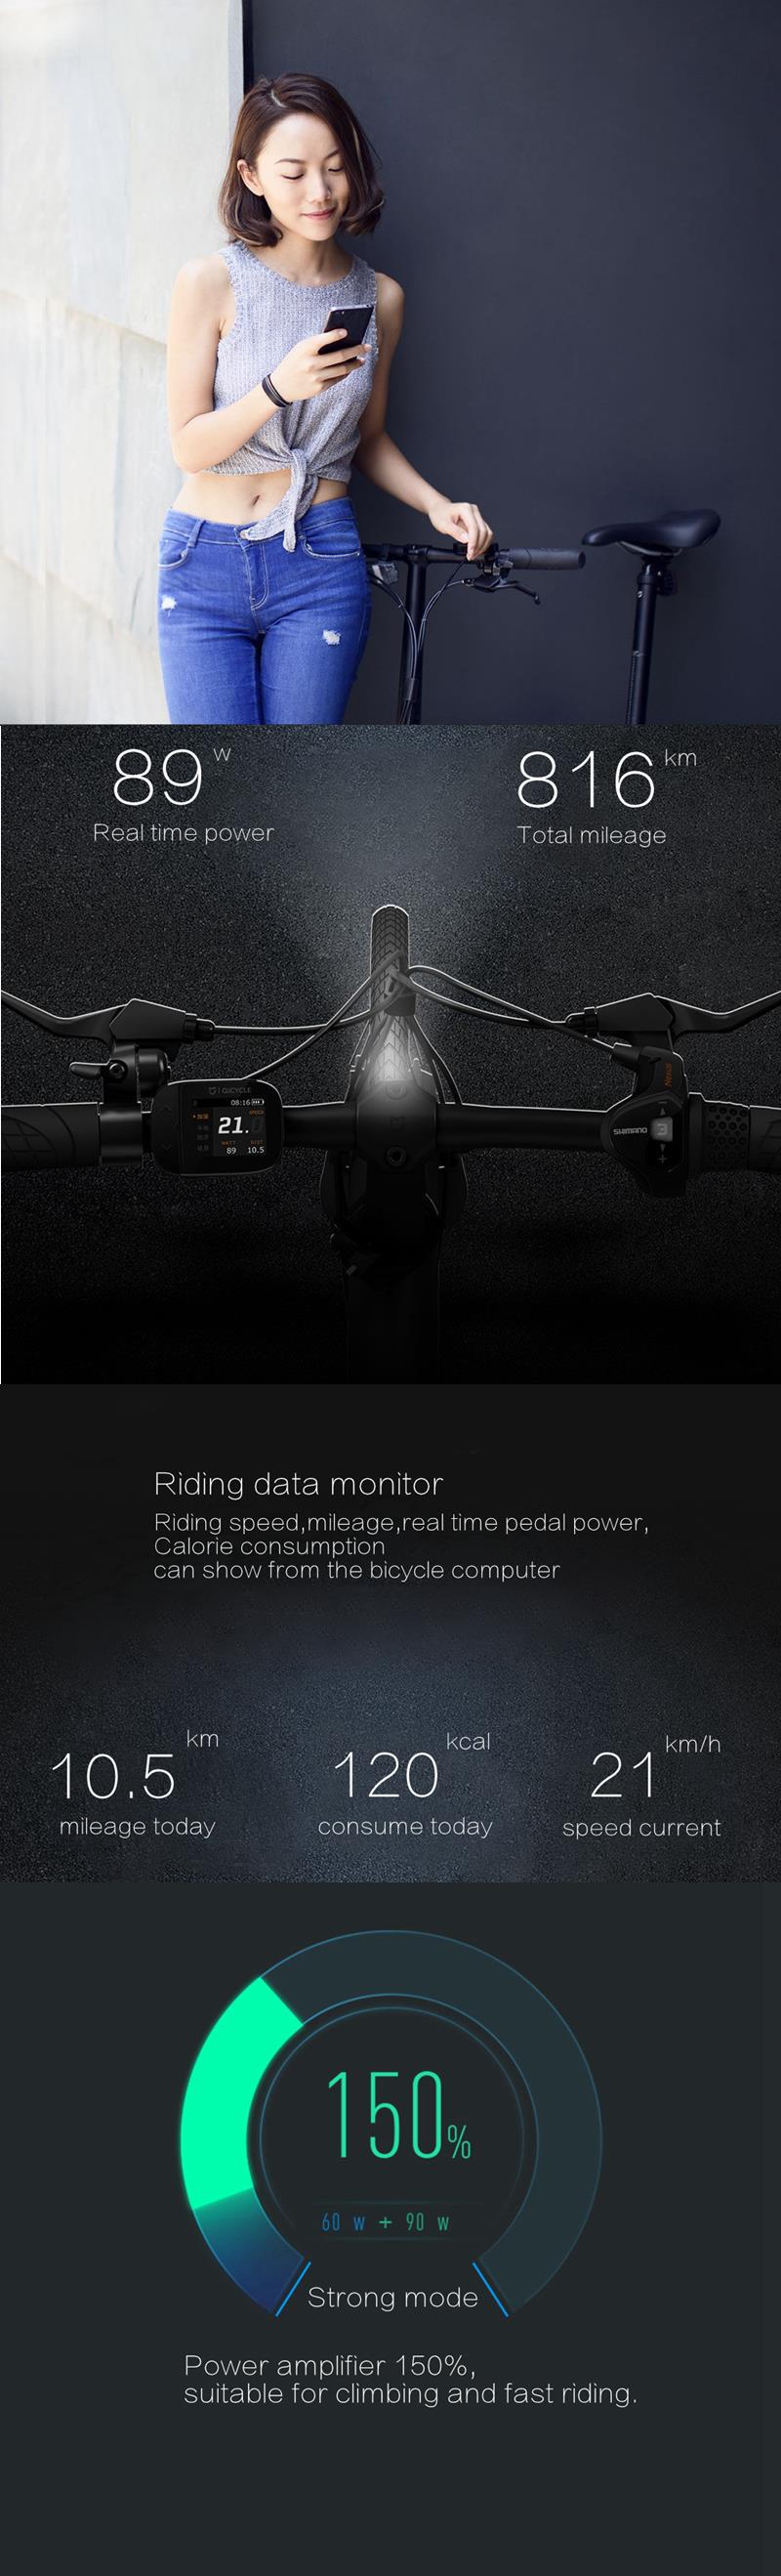 Xiaomi Smart Electric Power Folding Bike Bluetooth 4.0 Smart Bike With Front and Rear Light Folding Pedals Support For APP Aluminum Alloy Frame